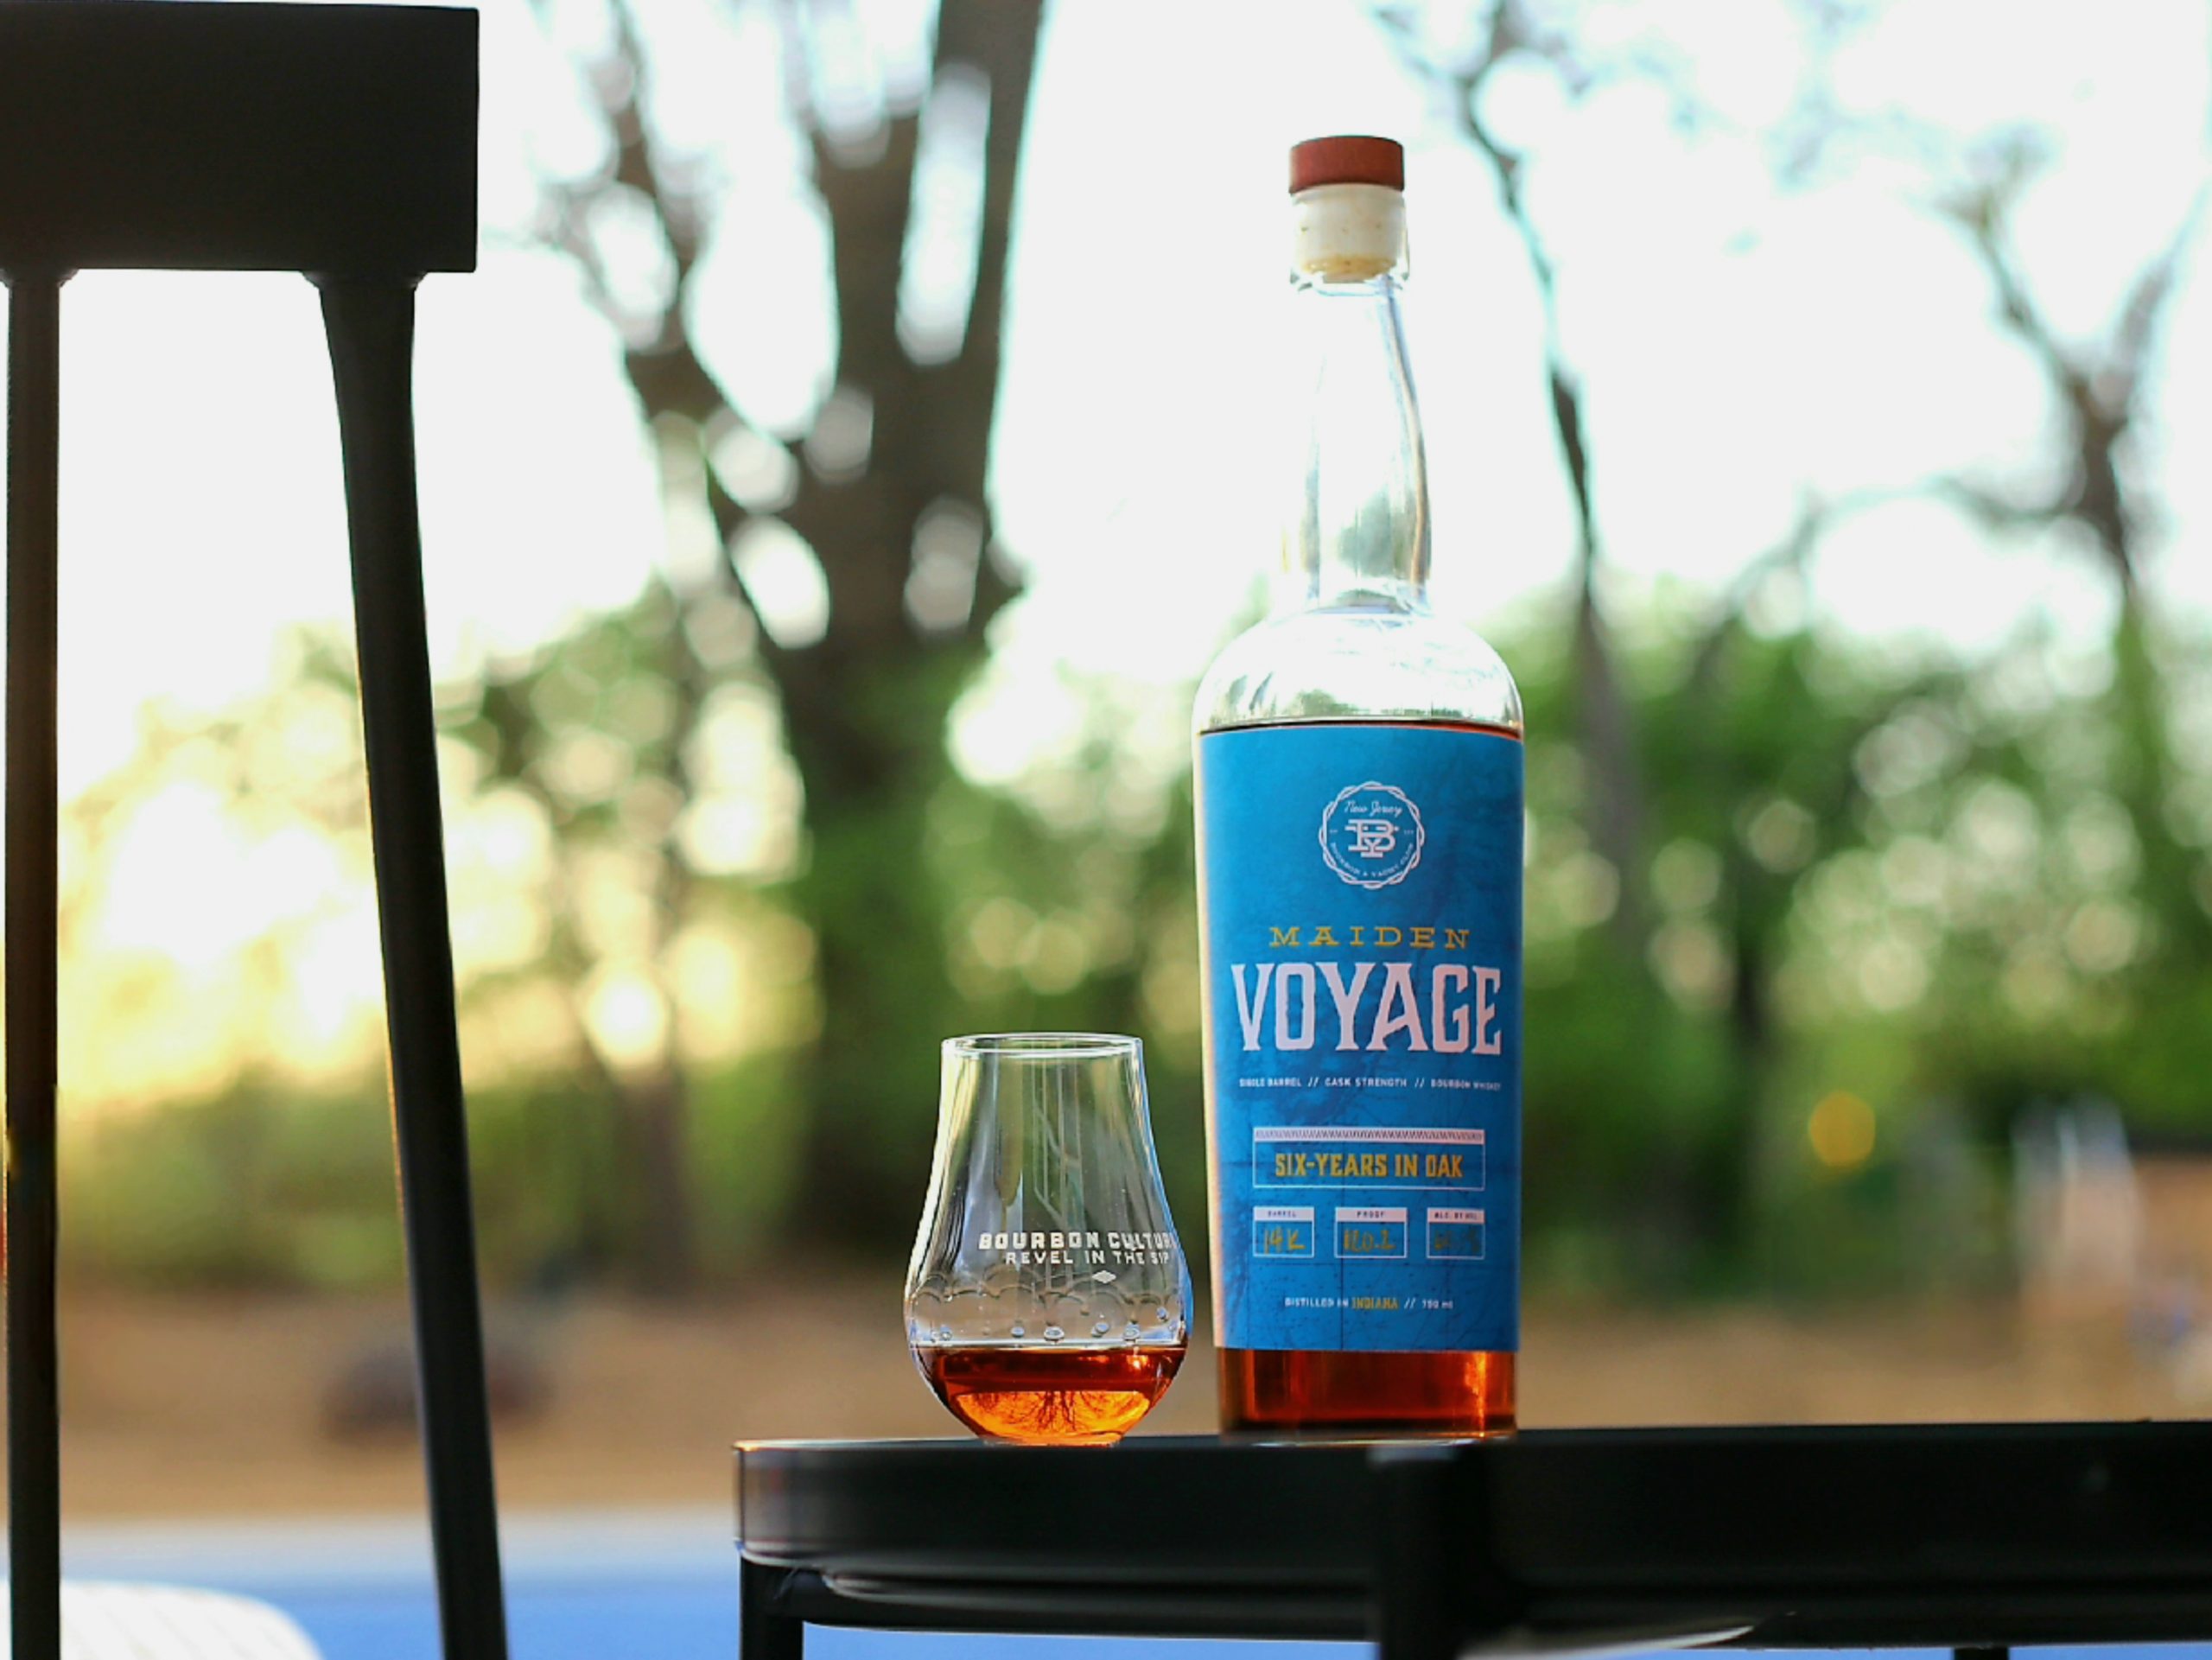 Maiden Voyage (New Jersey Bourbon & Yacht Club Single Barrel) Review